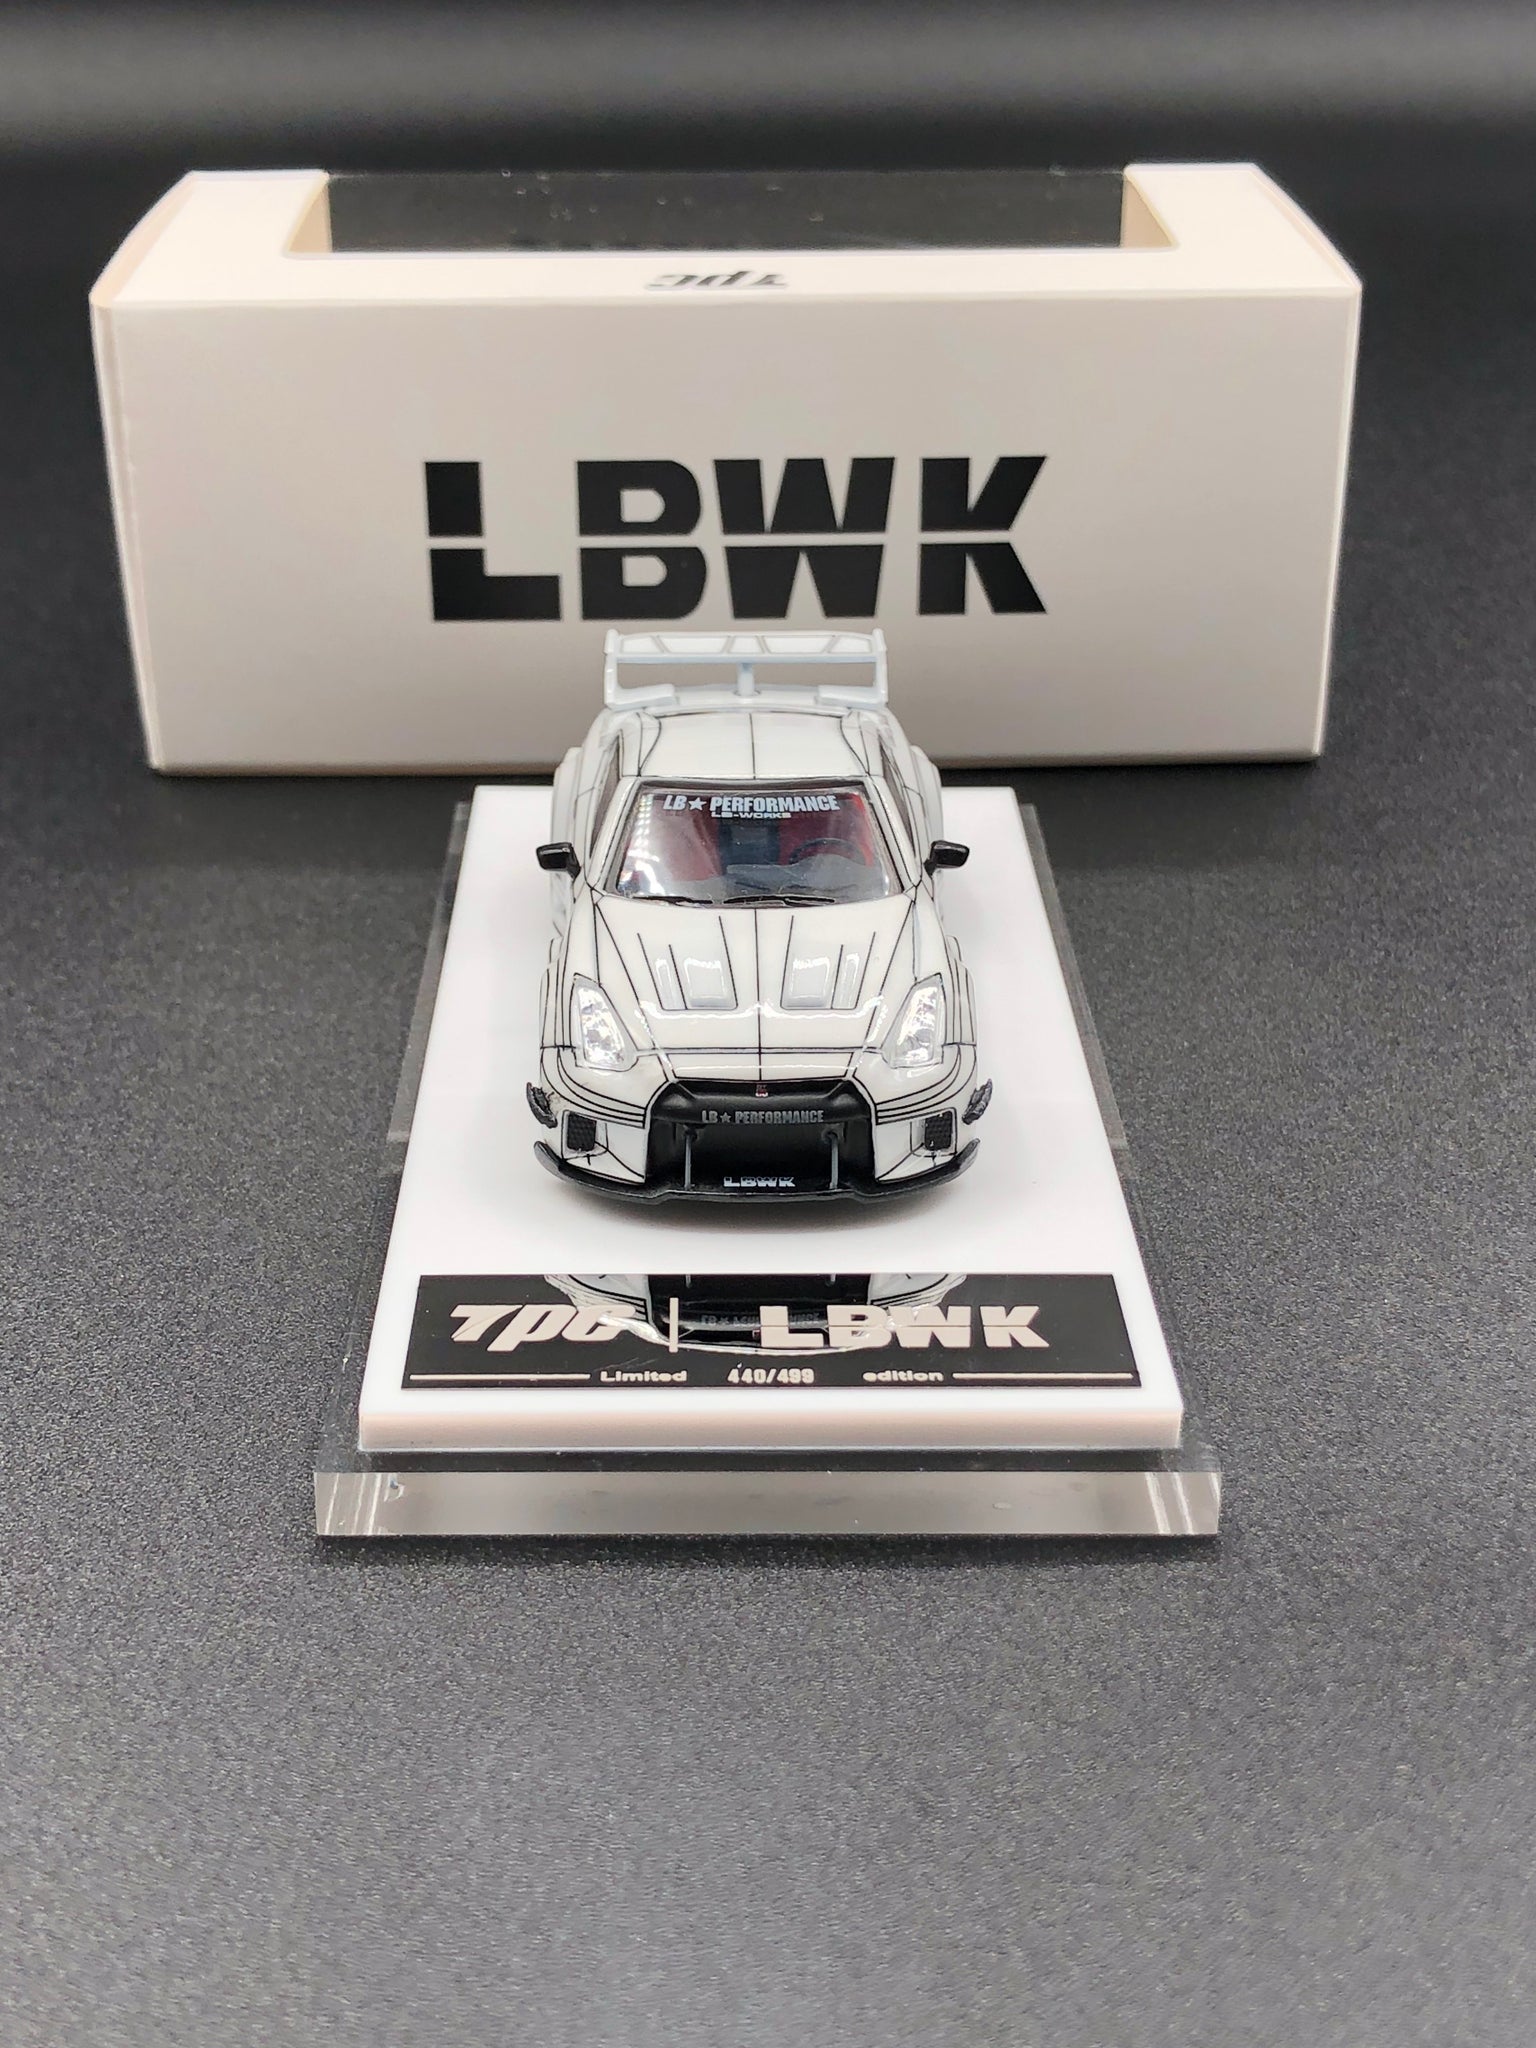 TPC 1/64 WHITE/BLACK GTR R35 - LBWK - WIDE BODY - ONLY 499 MADE